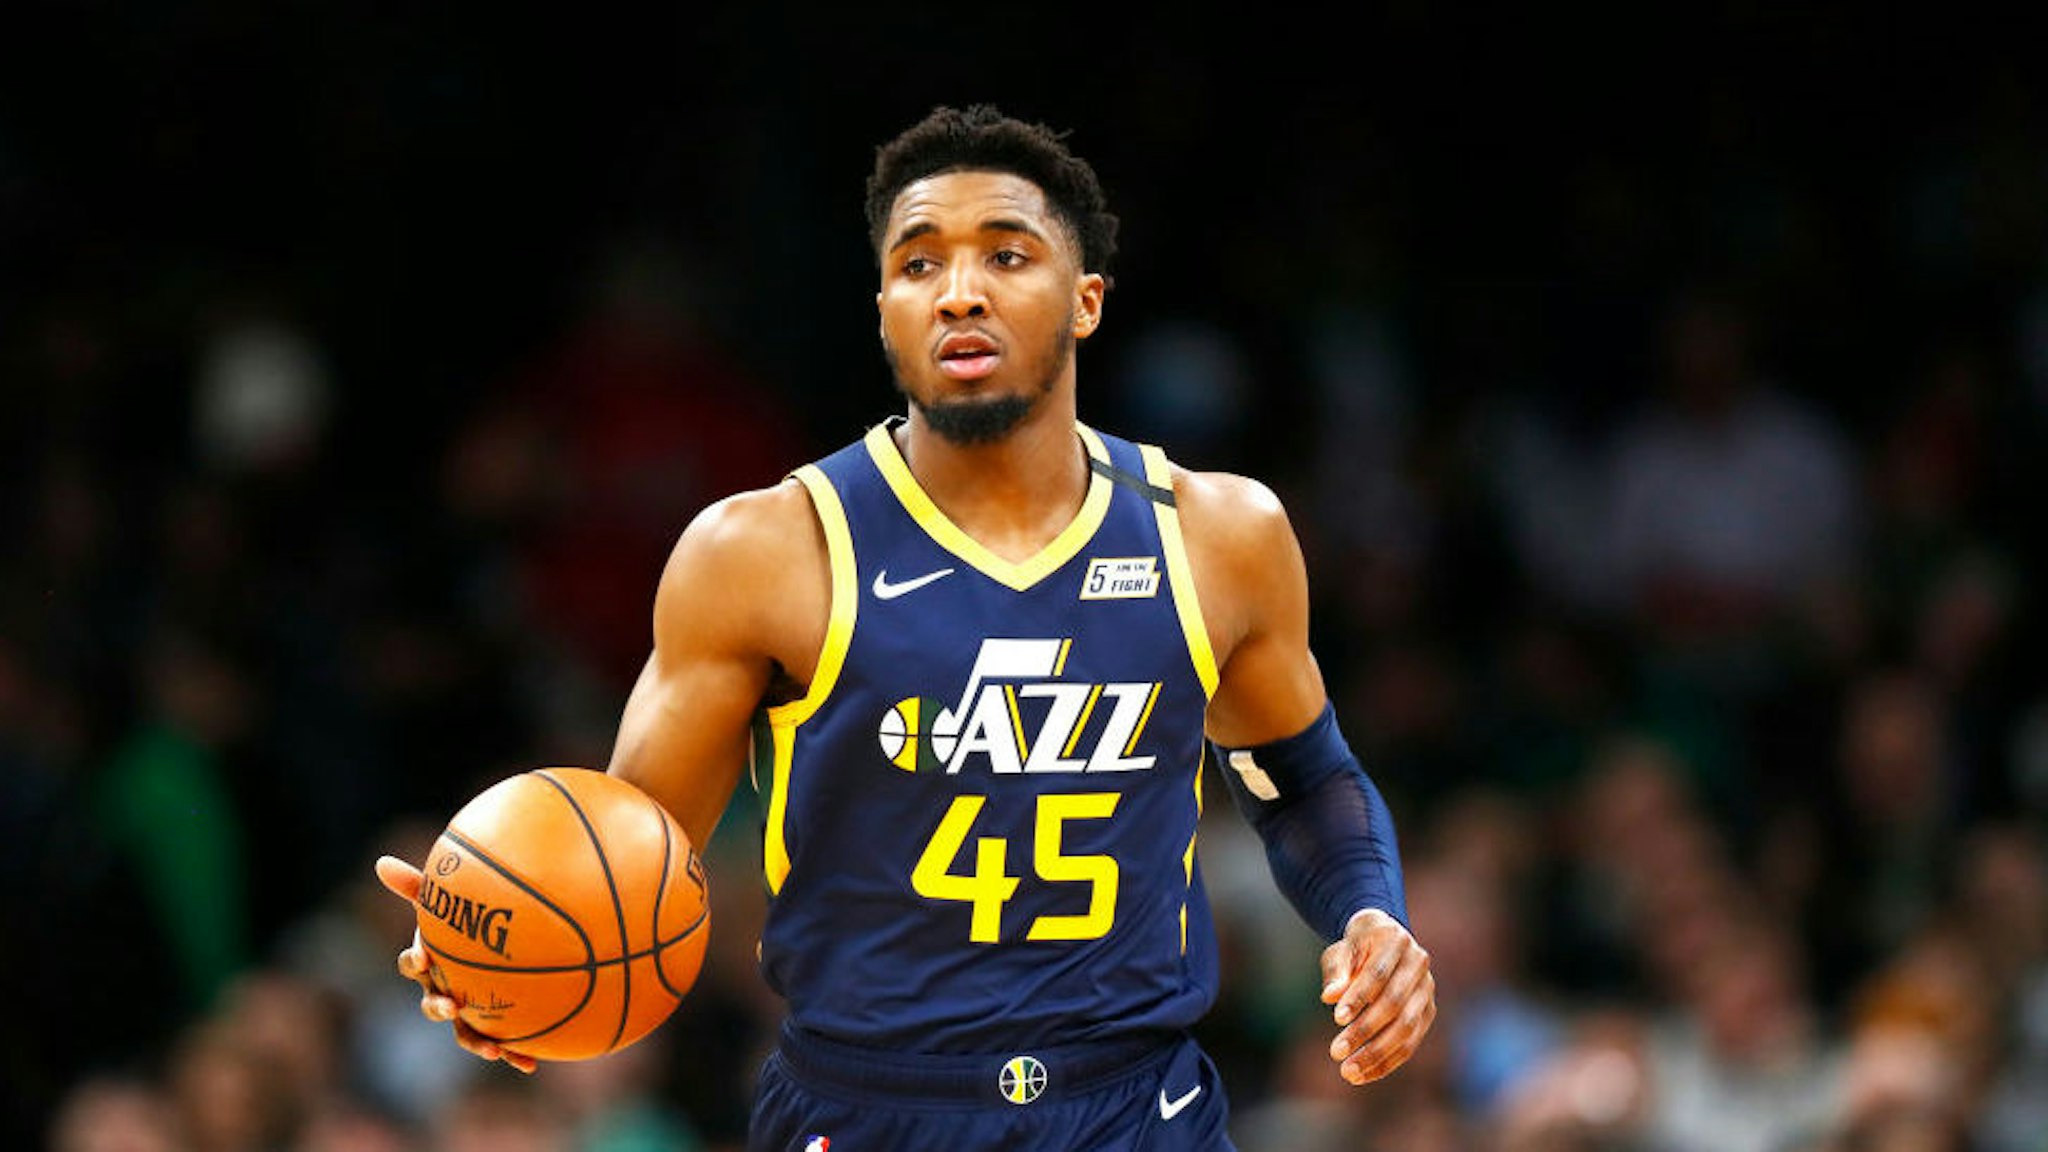 Donovan Mitchell #45 of the Utah Jazz brings the ball up court during the third quarter of the game against the Boston Celtics at TD Garden on March 06, 2020 in Boston, Massachusetts. NOTE TO USER: User expressly acknowledges and agrees that, by downloading and or using this photograph, User is consenting to the terms and conditions of the Getty Images License Agreement. (Photo by Omar Rawlings/Getty Images)